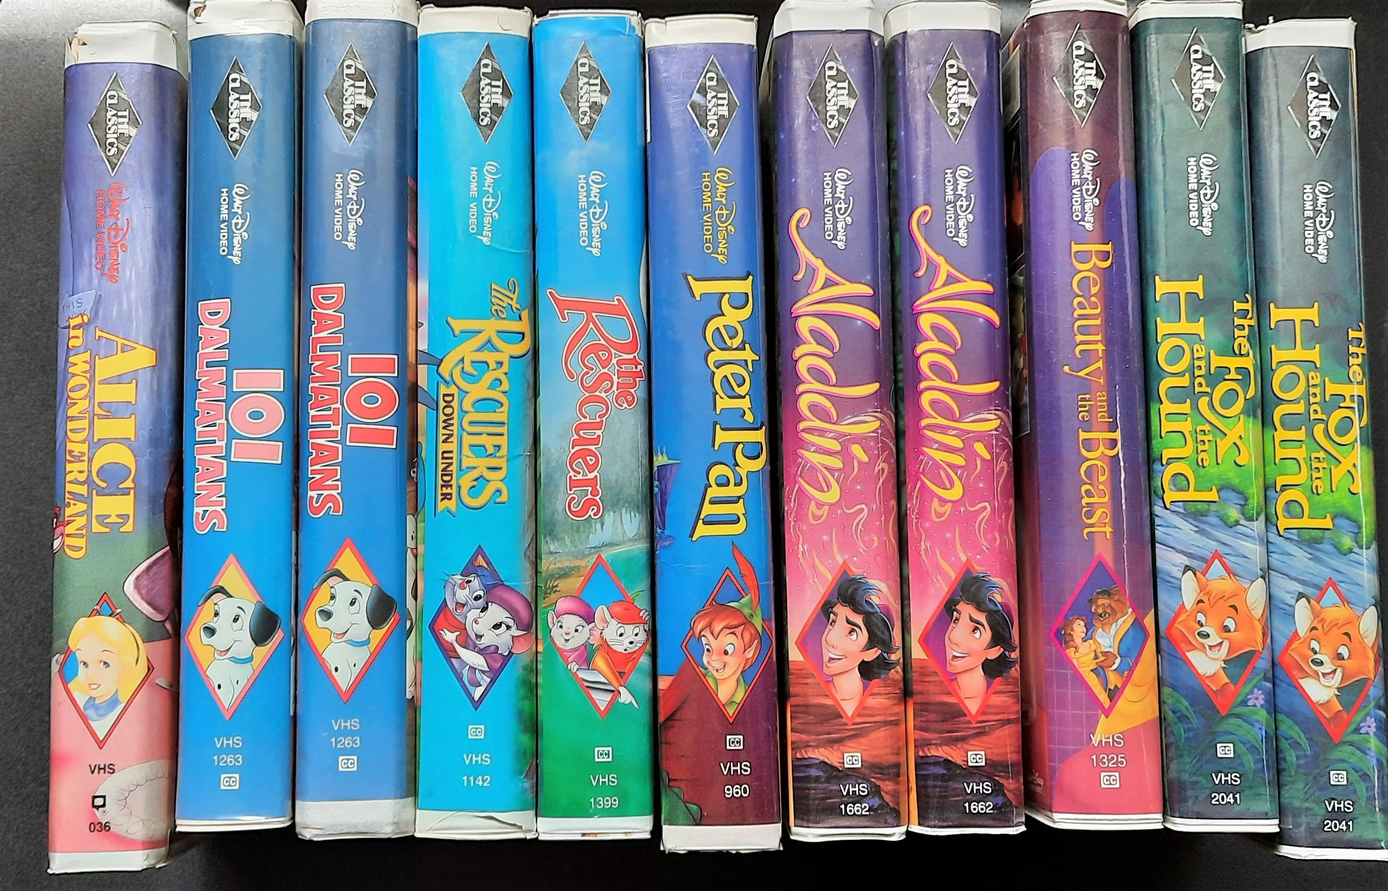 What Are The Disney Black Diamond VHS Tapes Worth? – Myth VS. Reality